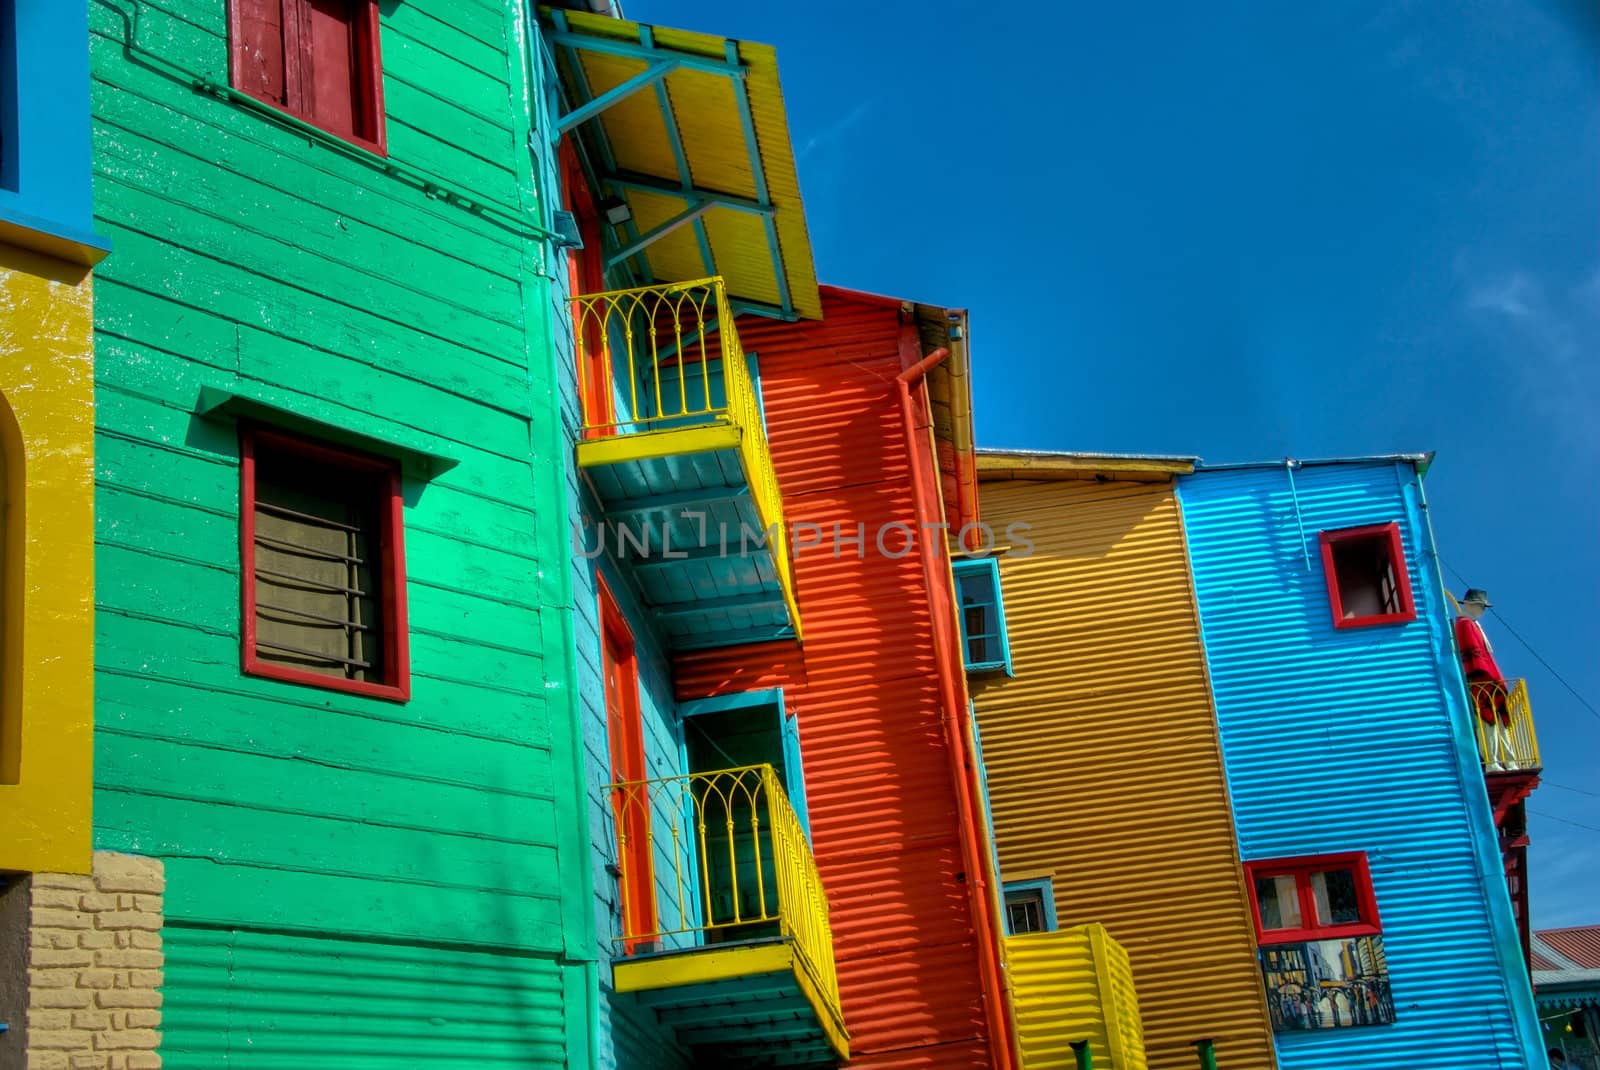 Caminito Street, in La Boca, Caminito is one of the most visited tourist attactions in Buenos Aires